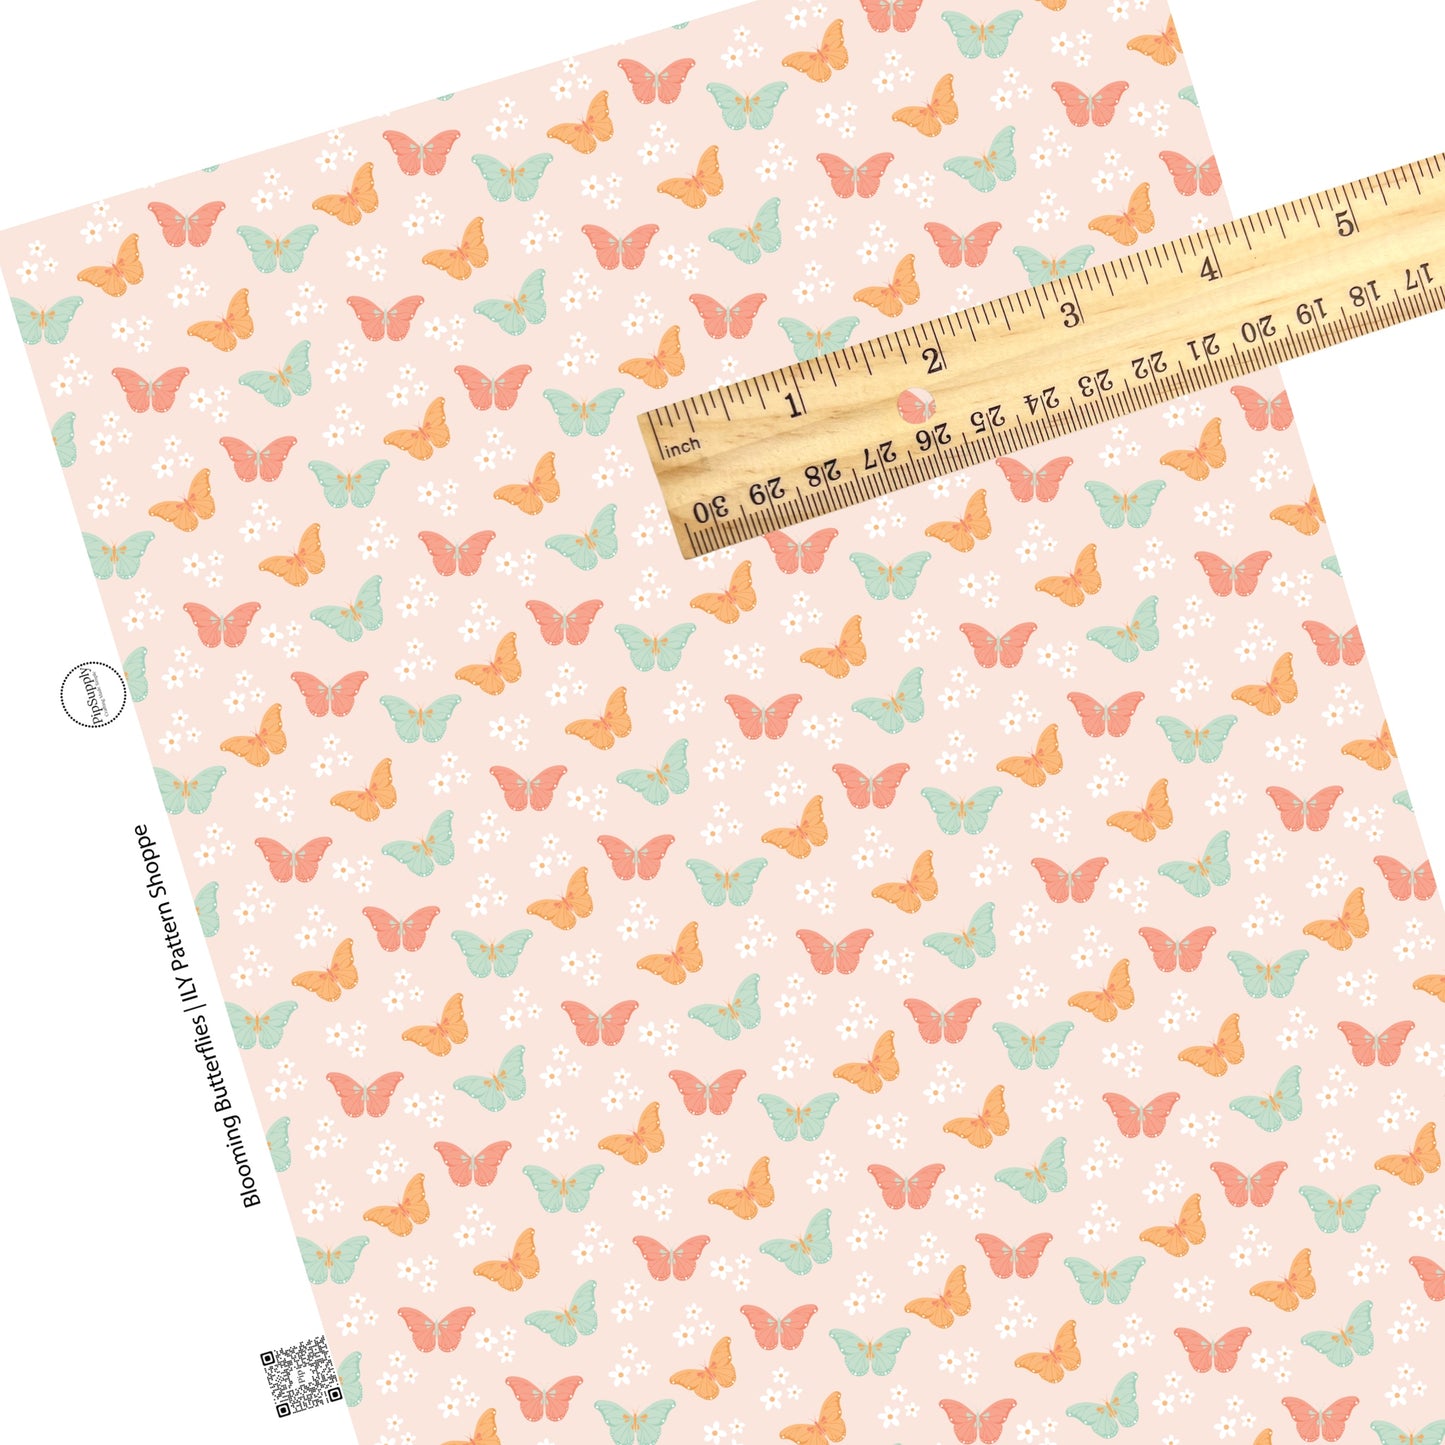 White daisies with pink, orange, and aqua butterflies on light pink faux leather sheet